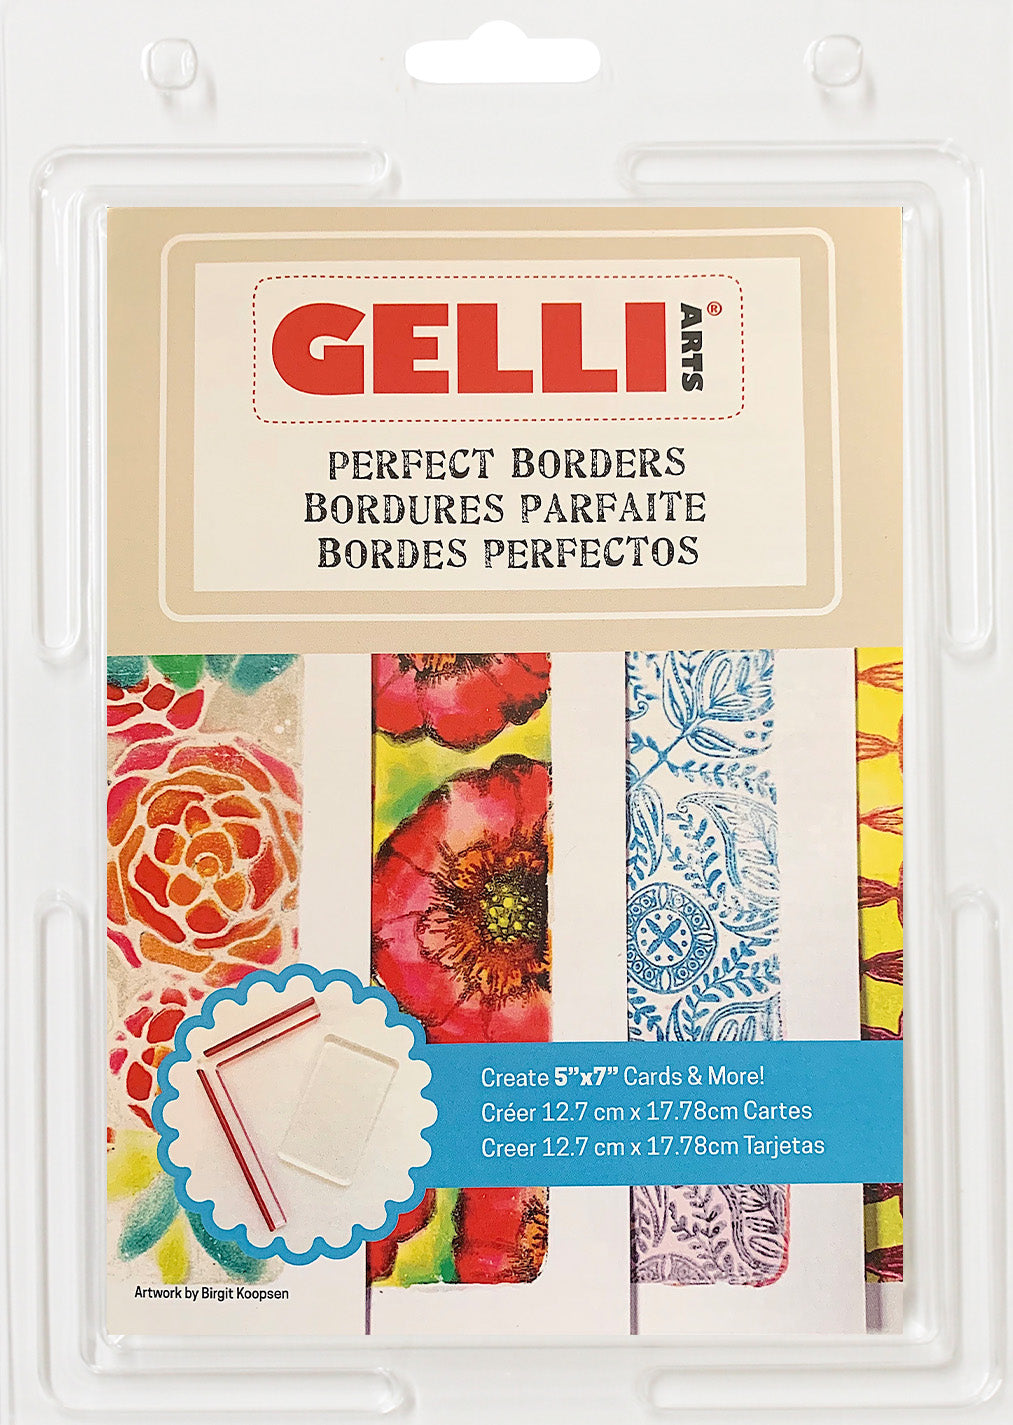 New! Perfect Borders - Create 5x7 Cards & More!